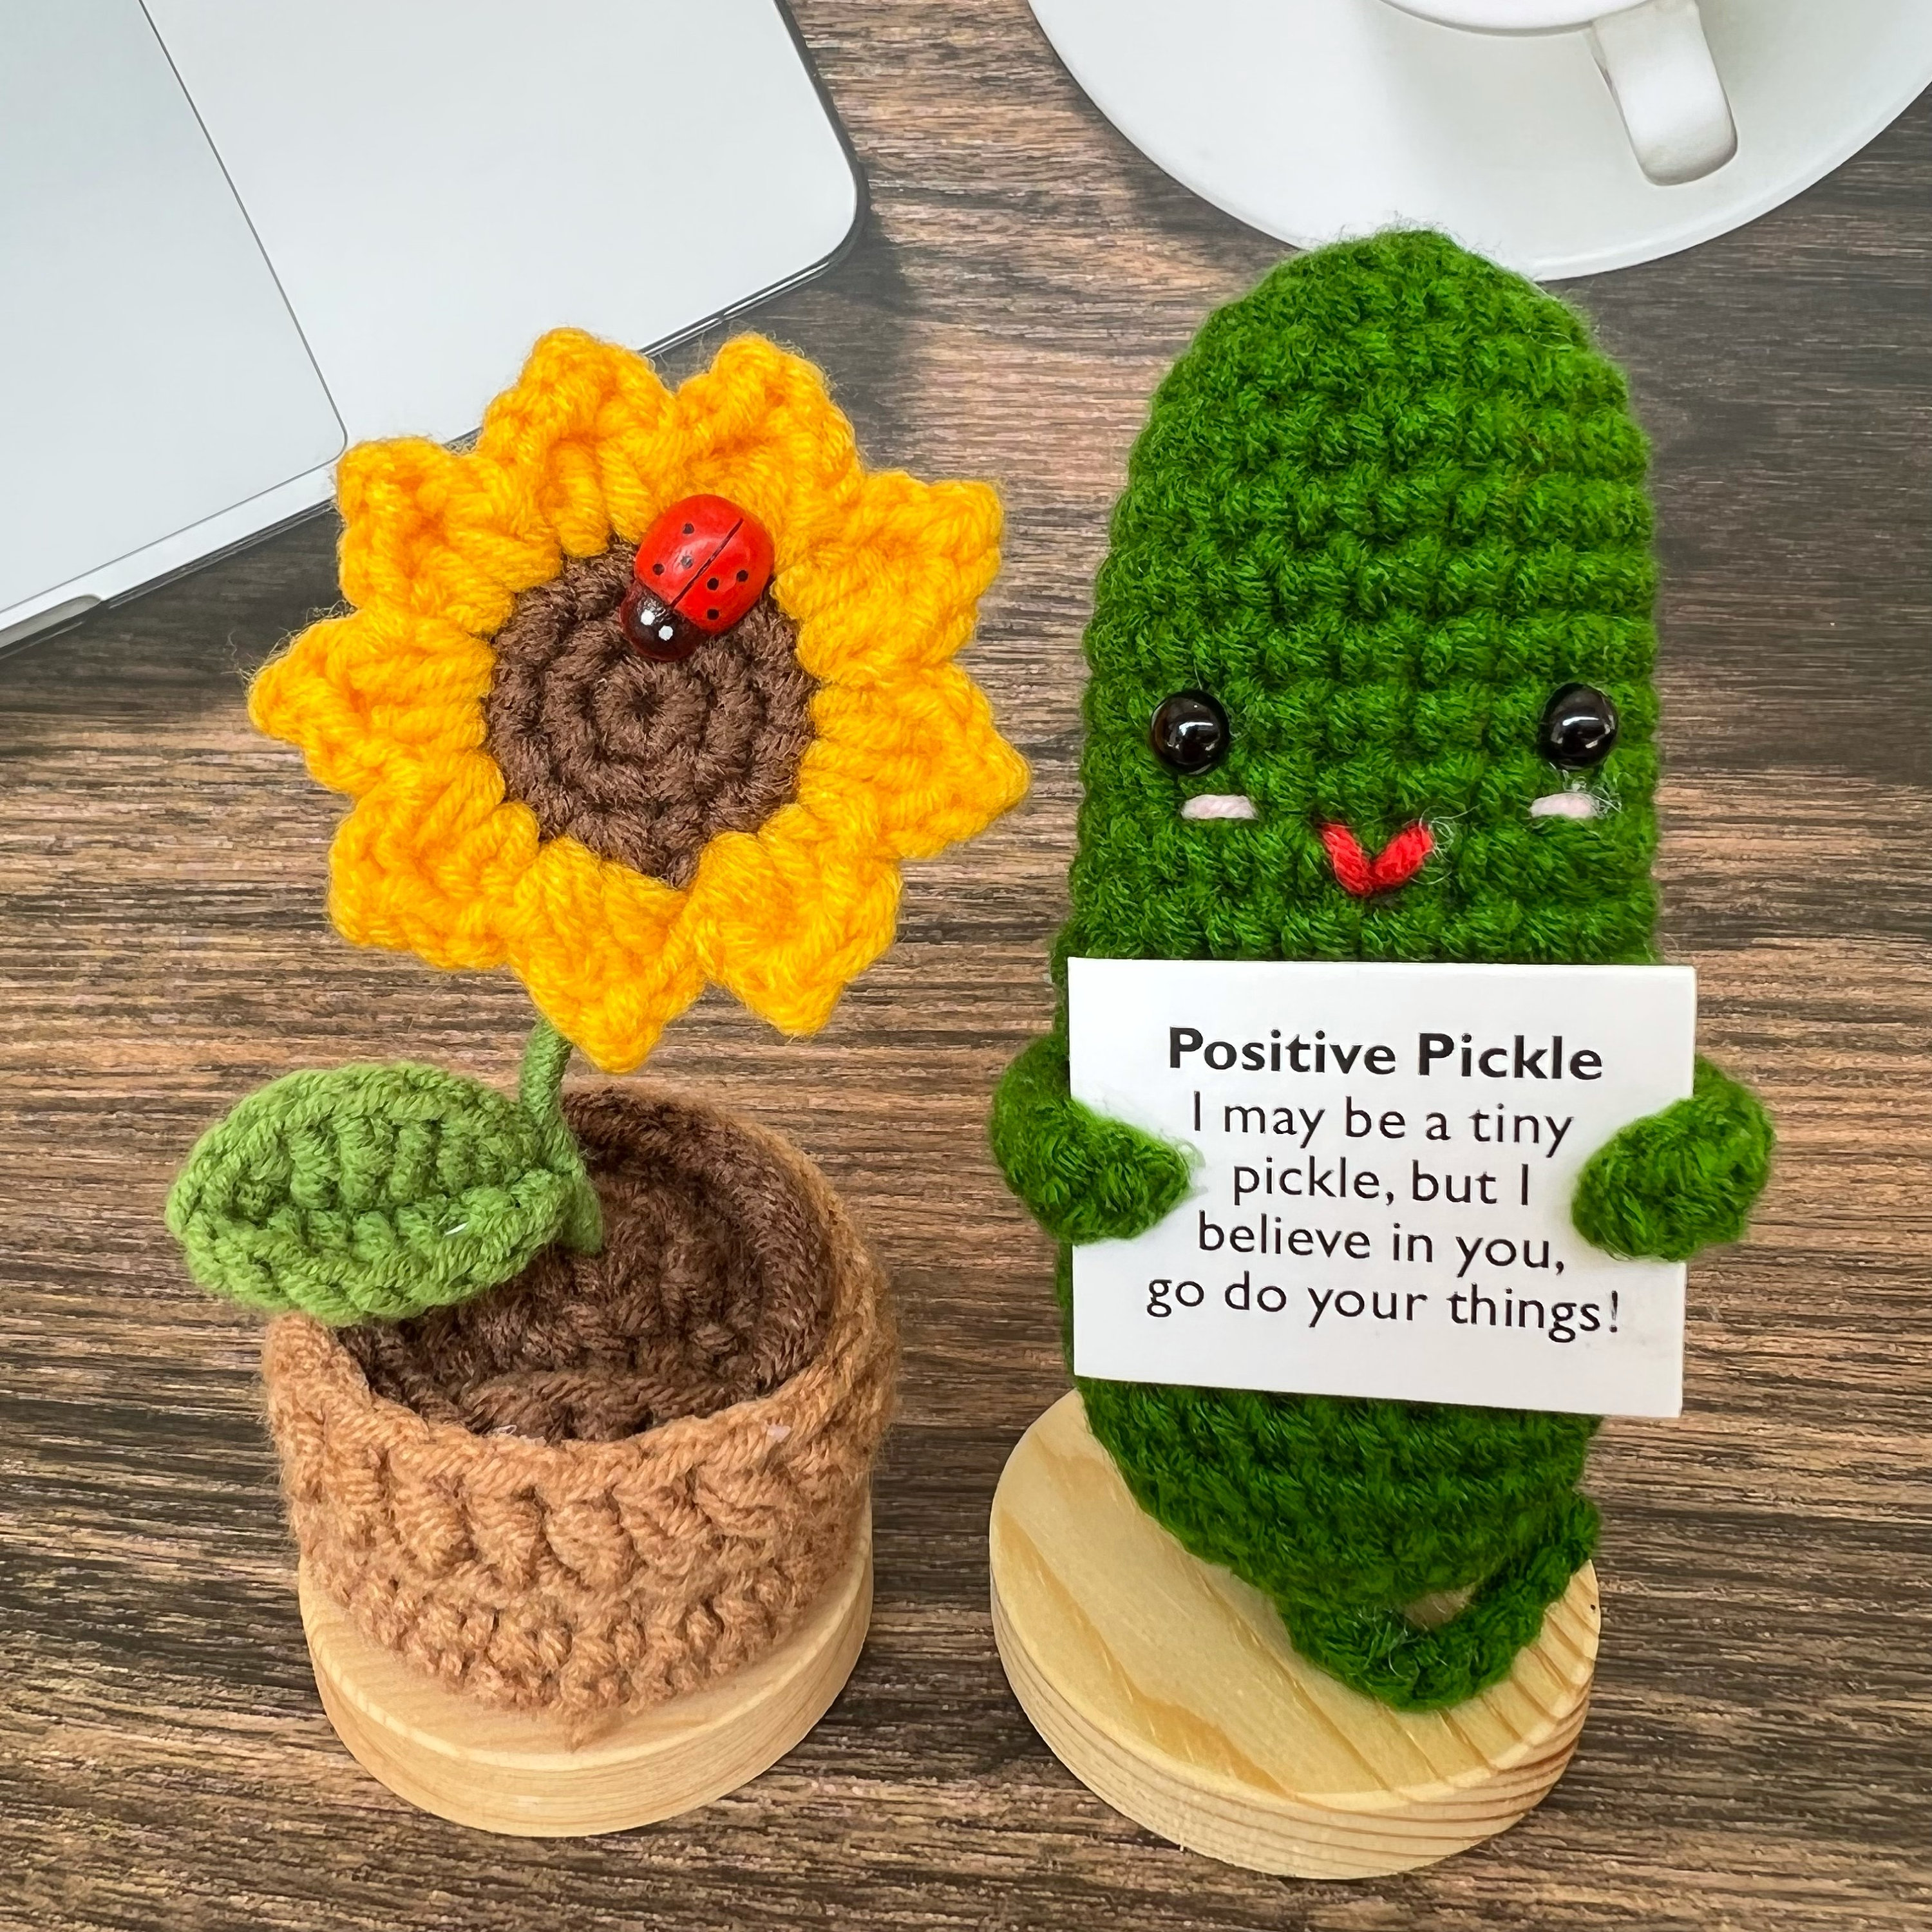 How freaking cute is this emotional support pickle?! Handmade